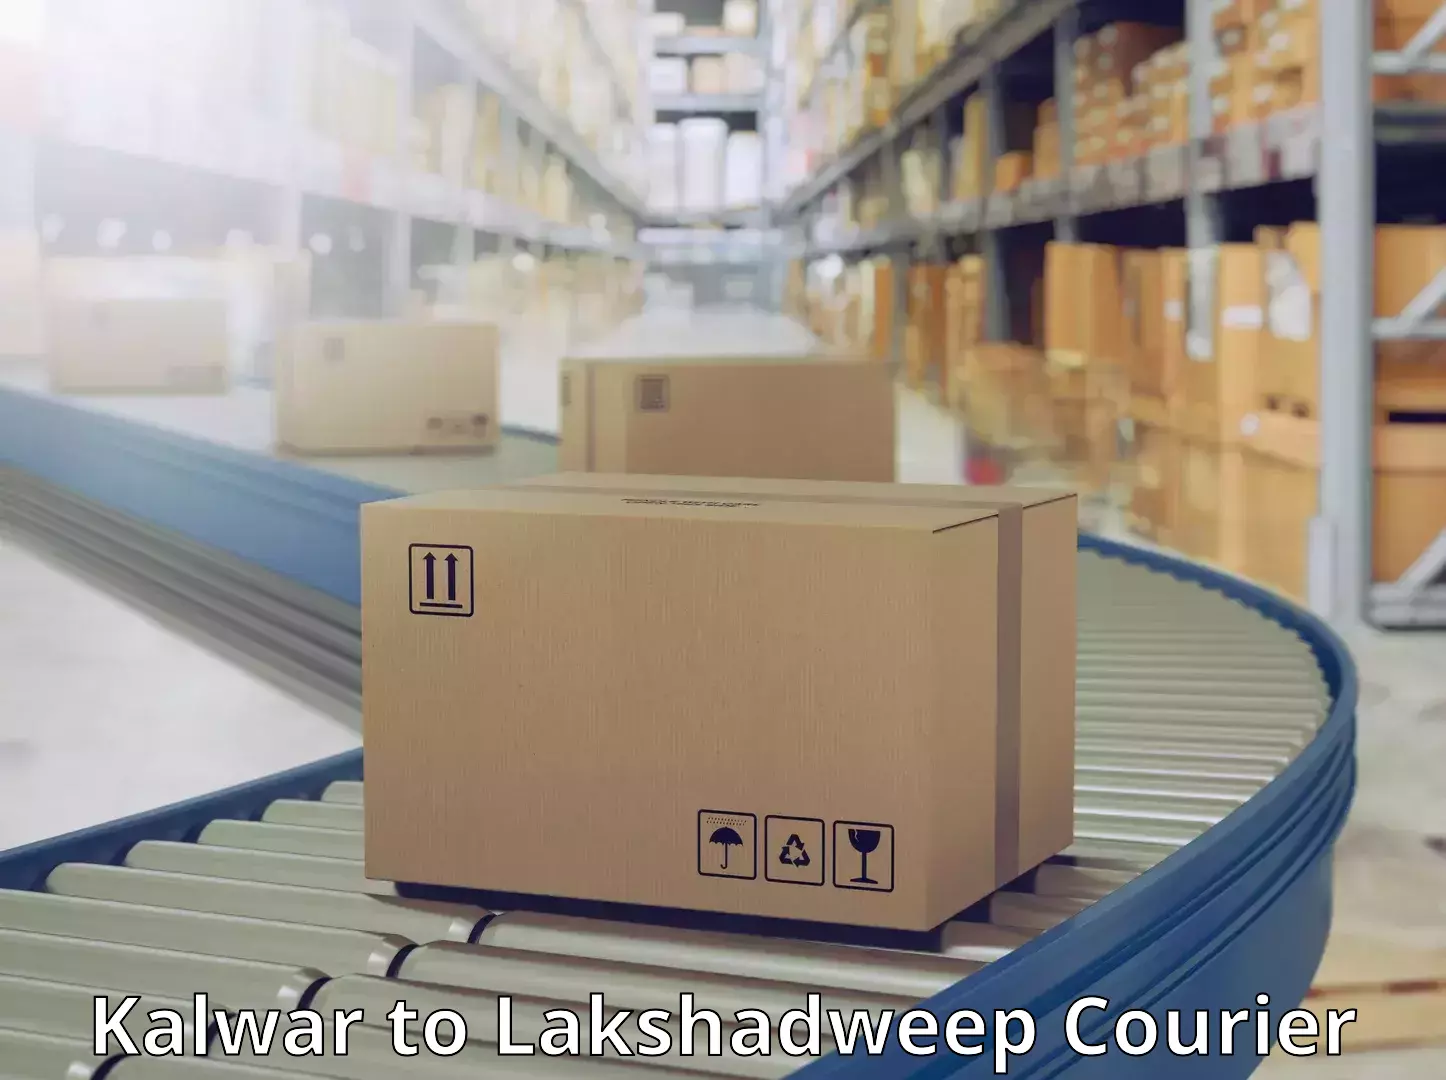 Full-service courier options Kalwar to Lakshadweep